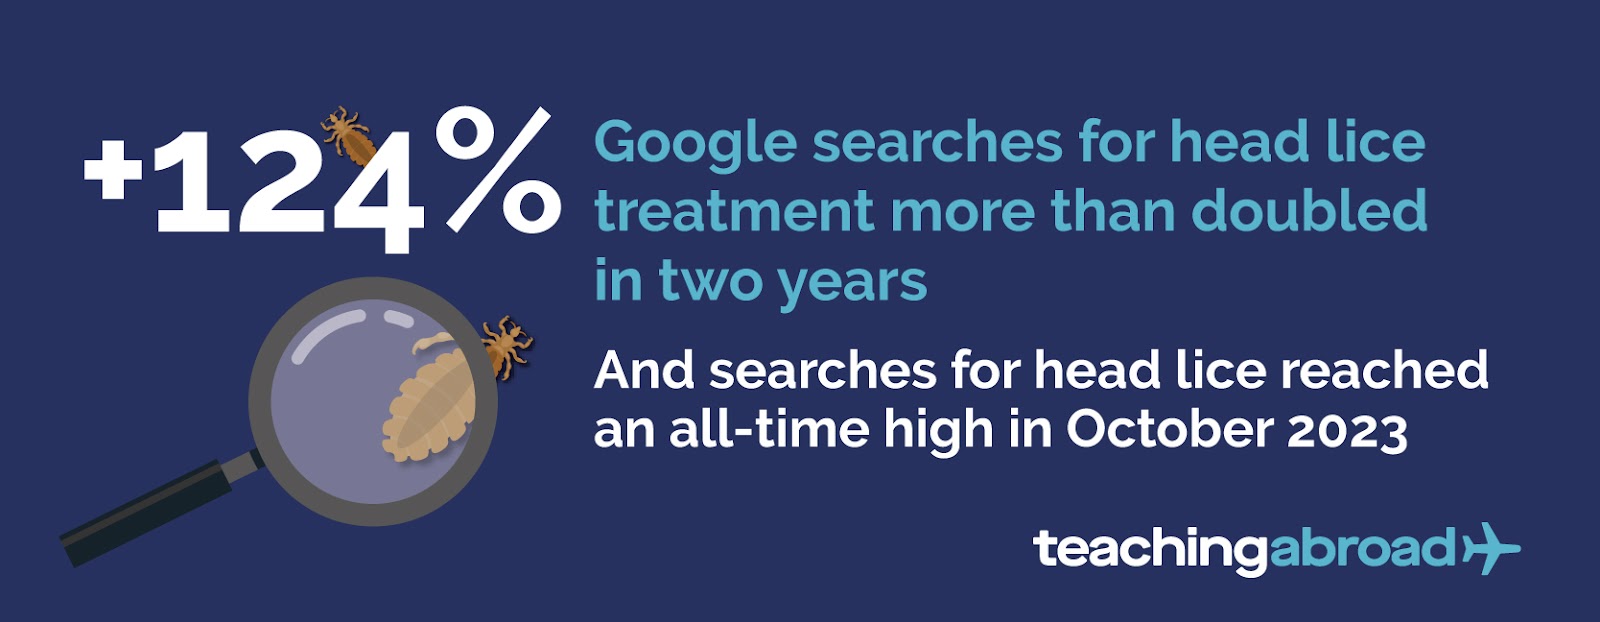 Google searches for head lice increased 124% in two years